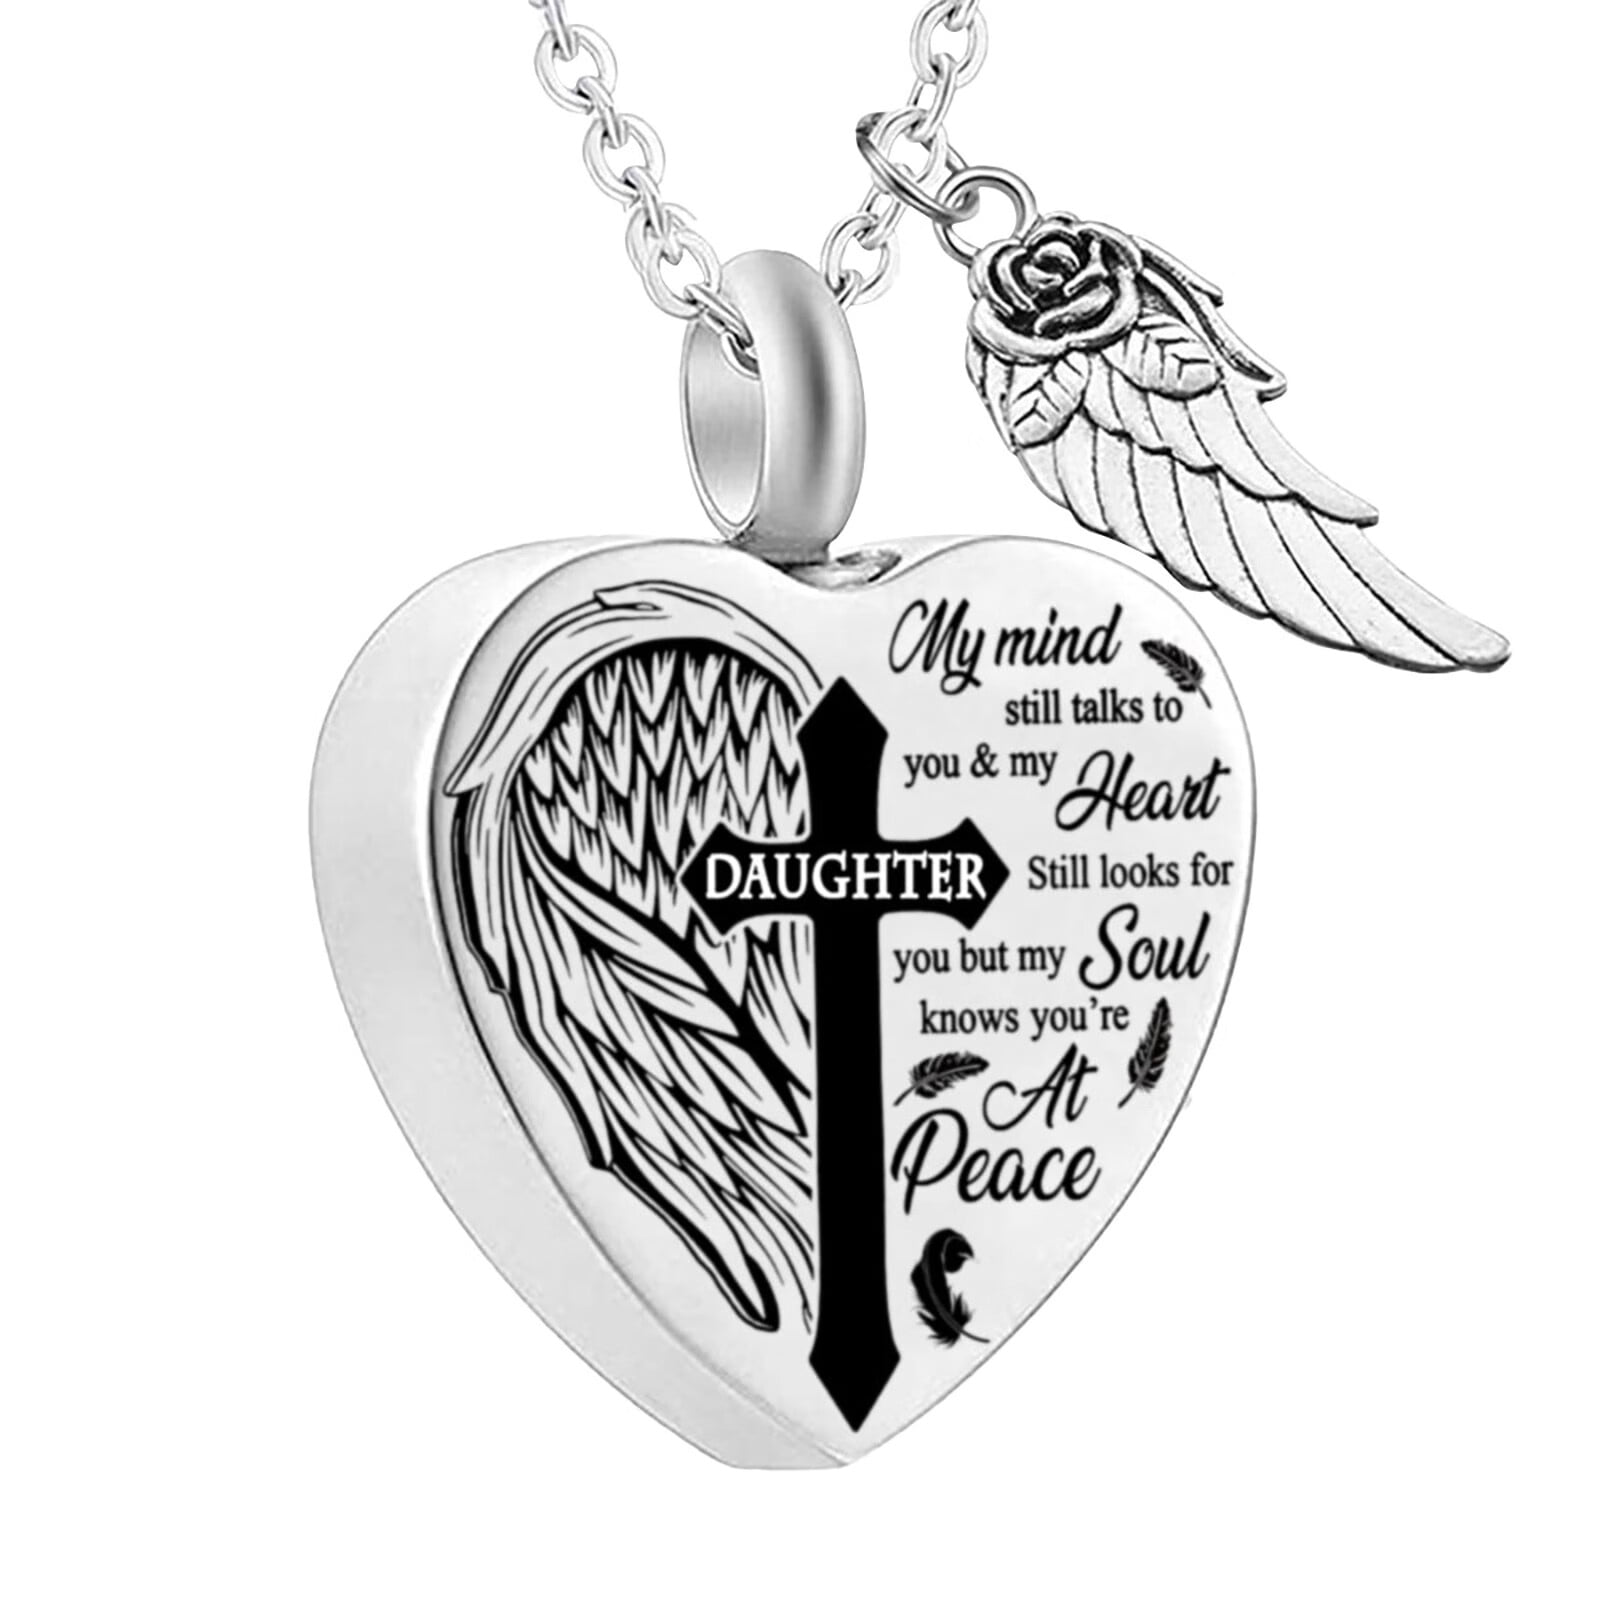 Kenklcie Cremation Jewelry For Ashes No Longer By My Side Forever In Heart Urn Pendant Necklace Grandma Grandpa Mom Dad Papa Nana Sister Necklaces Pe 88dc507d 19ee 4899 8c52 dfe6df501644.c381924179f8e6967a08f58b0b68dfe8